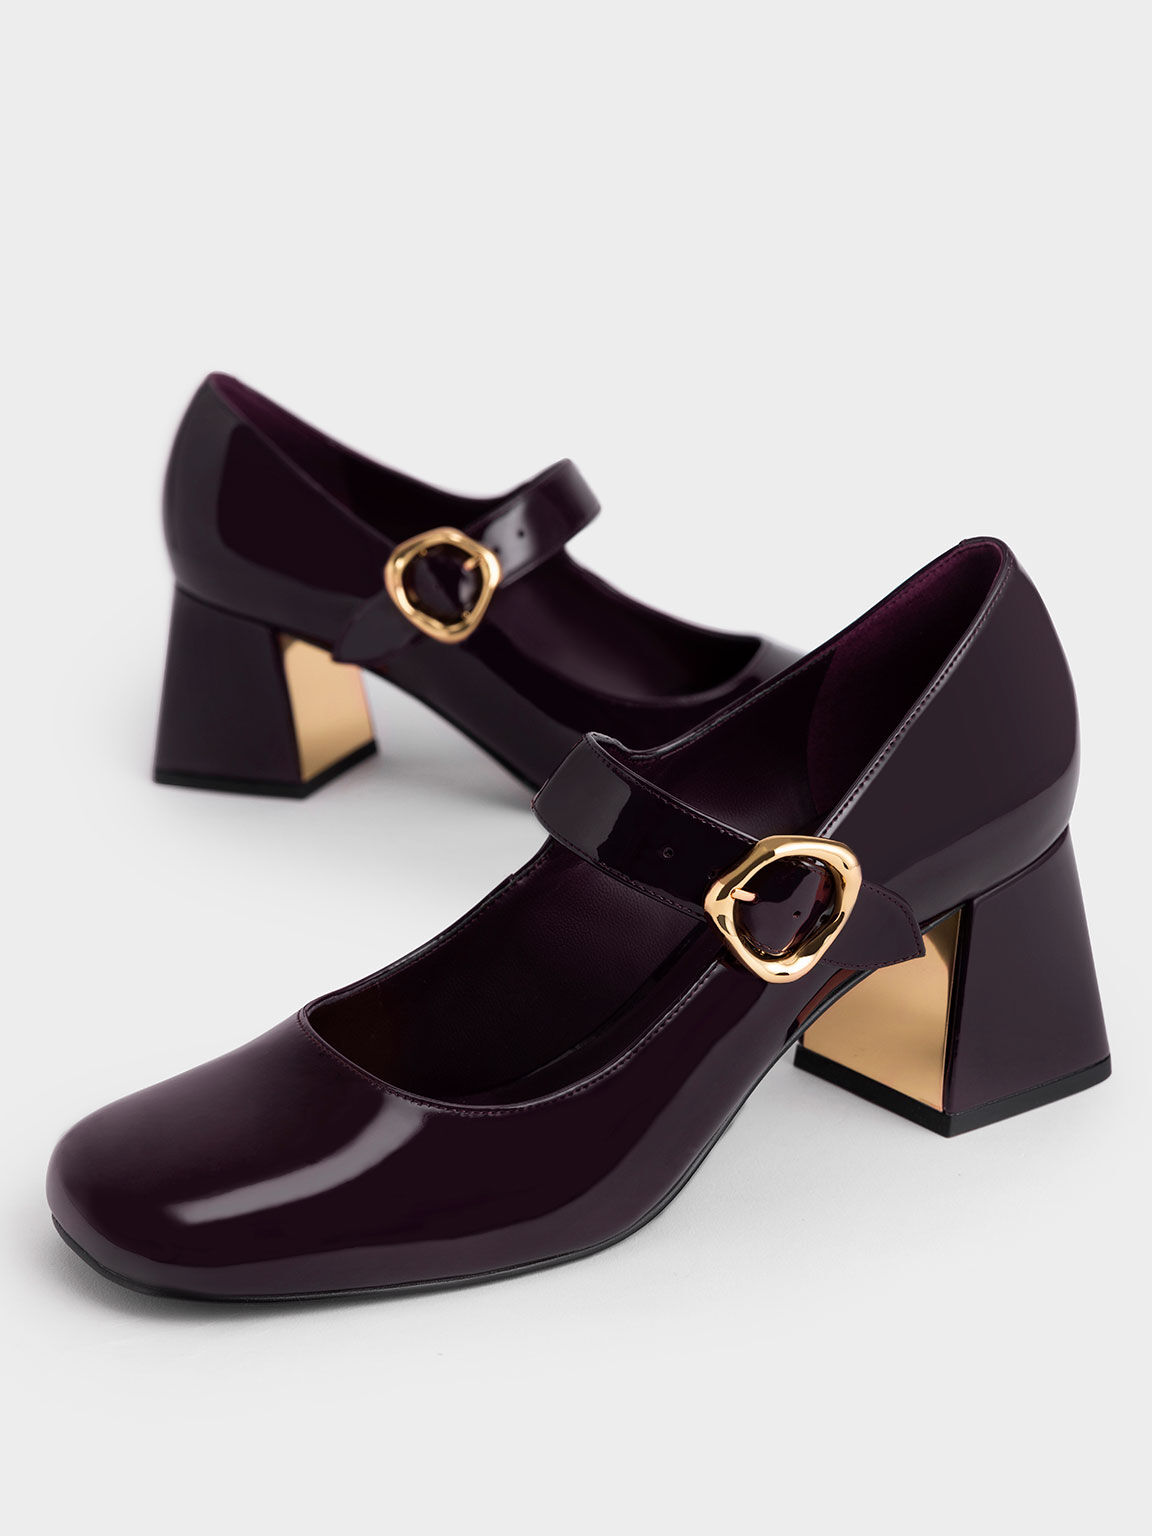 Maroon Patent Buckled Mary Jane Pumps - CHARLES & KEITH UK